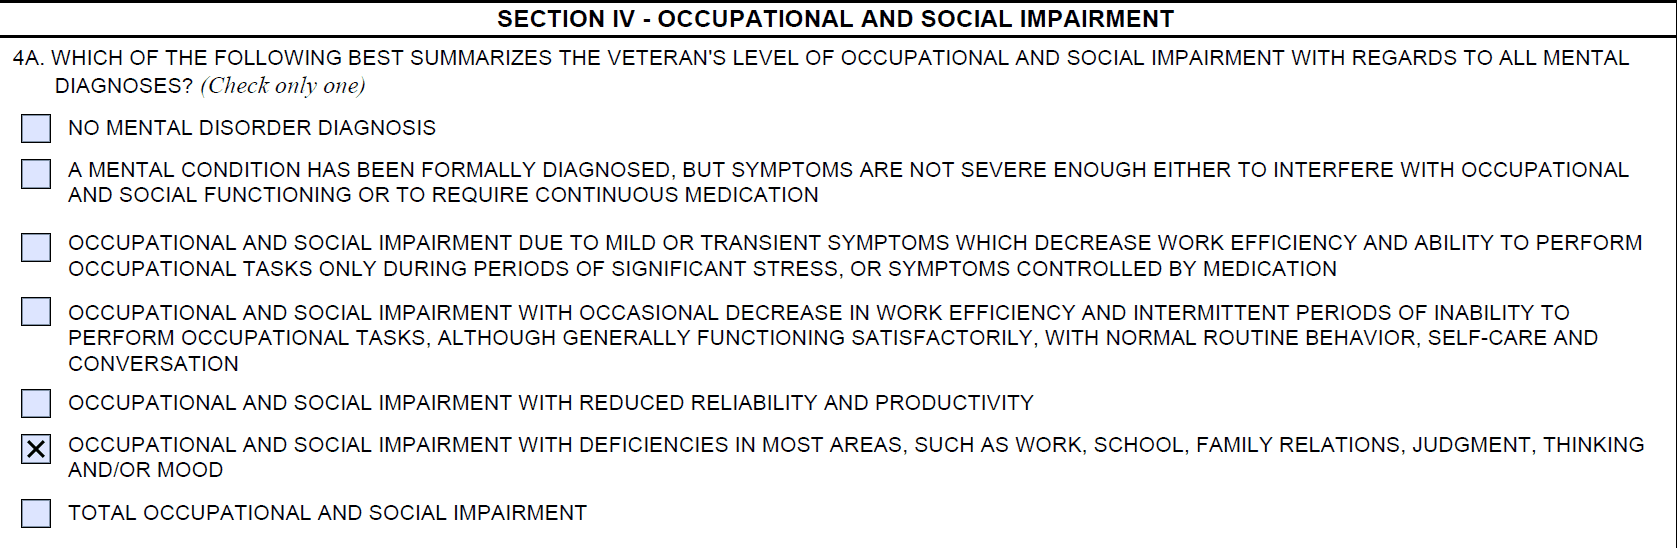 PTSD Review DBQ - Occupational and Social Impairment